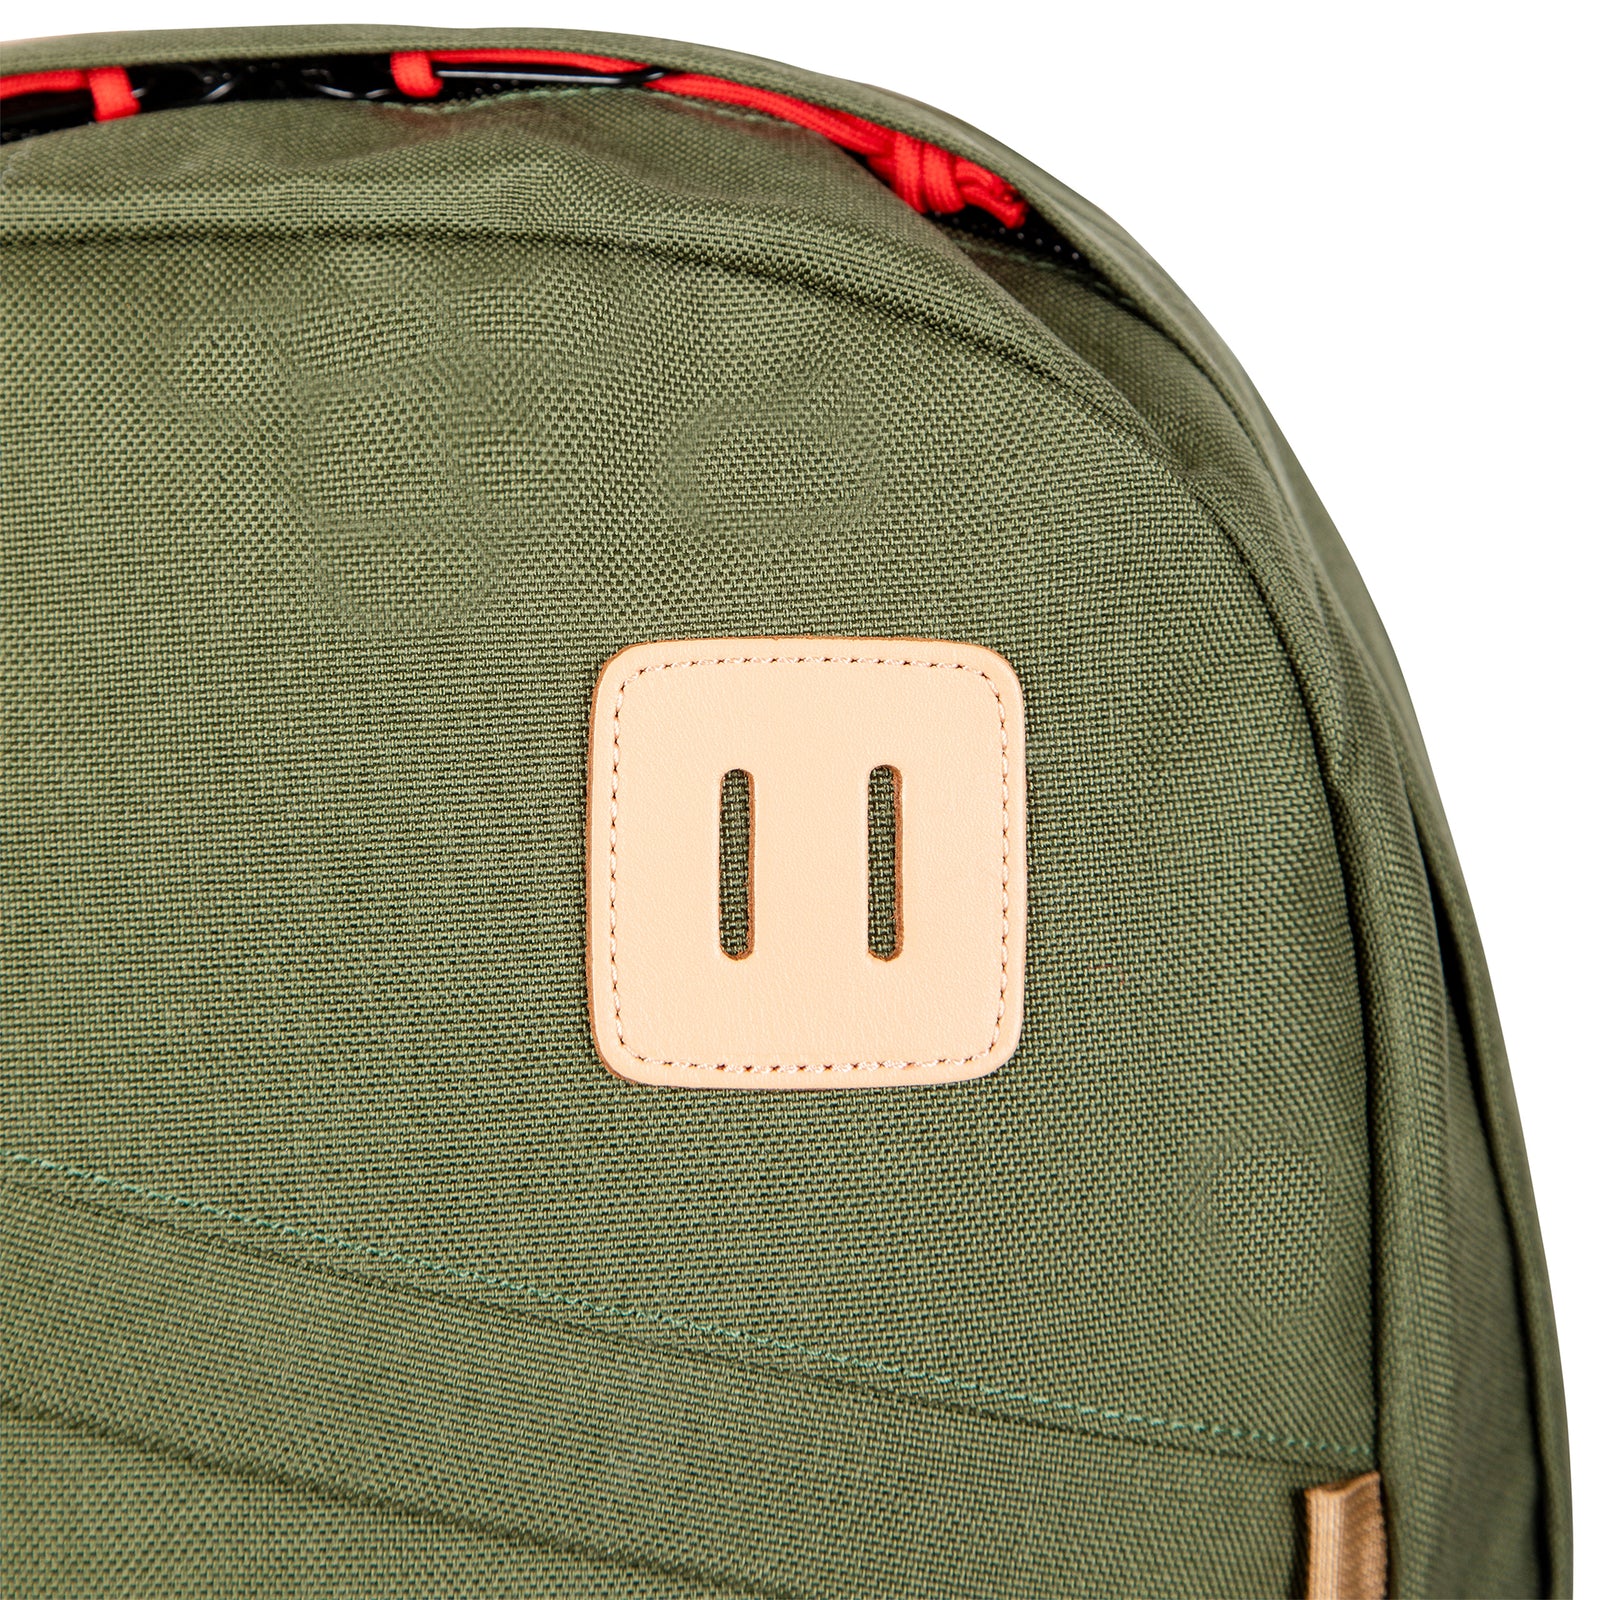 General shot of lash tab on Topo Designs Daypack Classic 100% recycled nylon laptop backpack for work or school in Olive green.